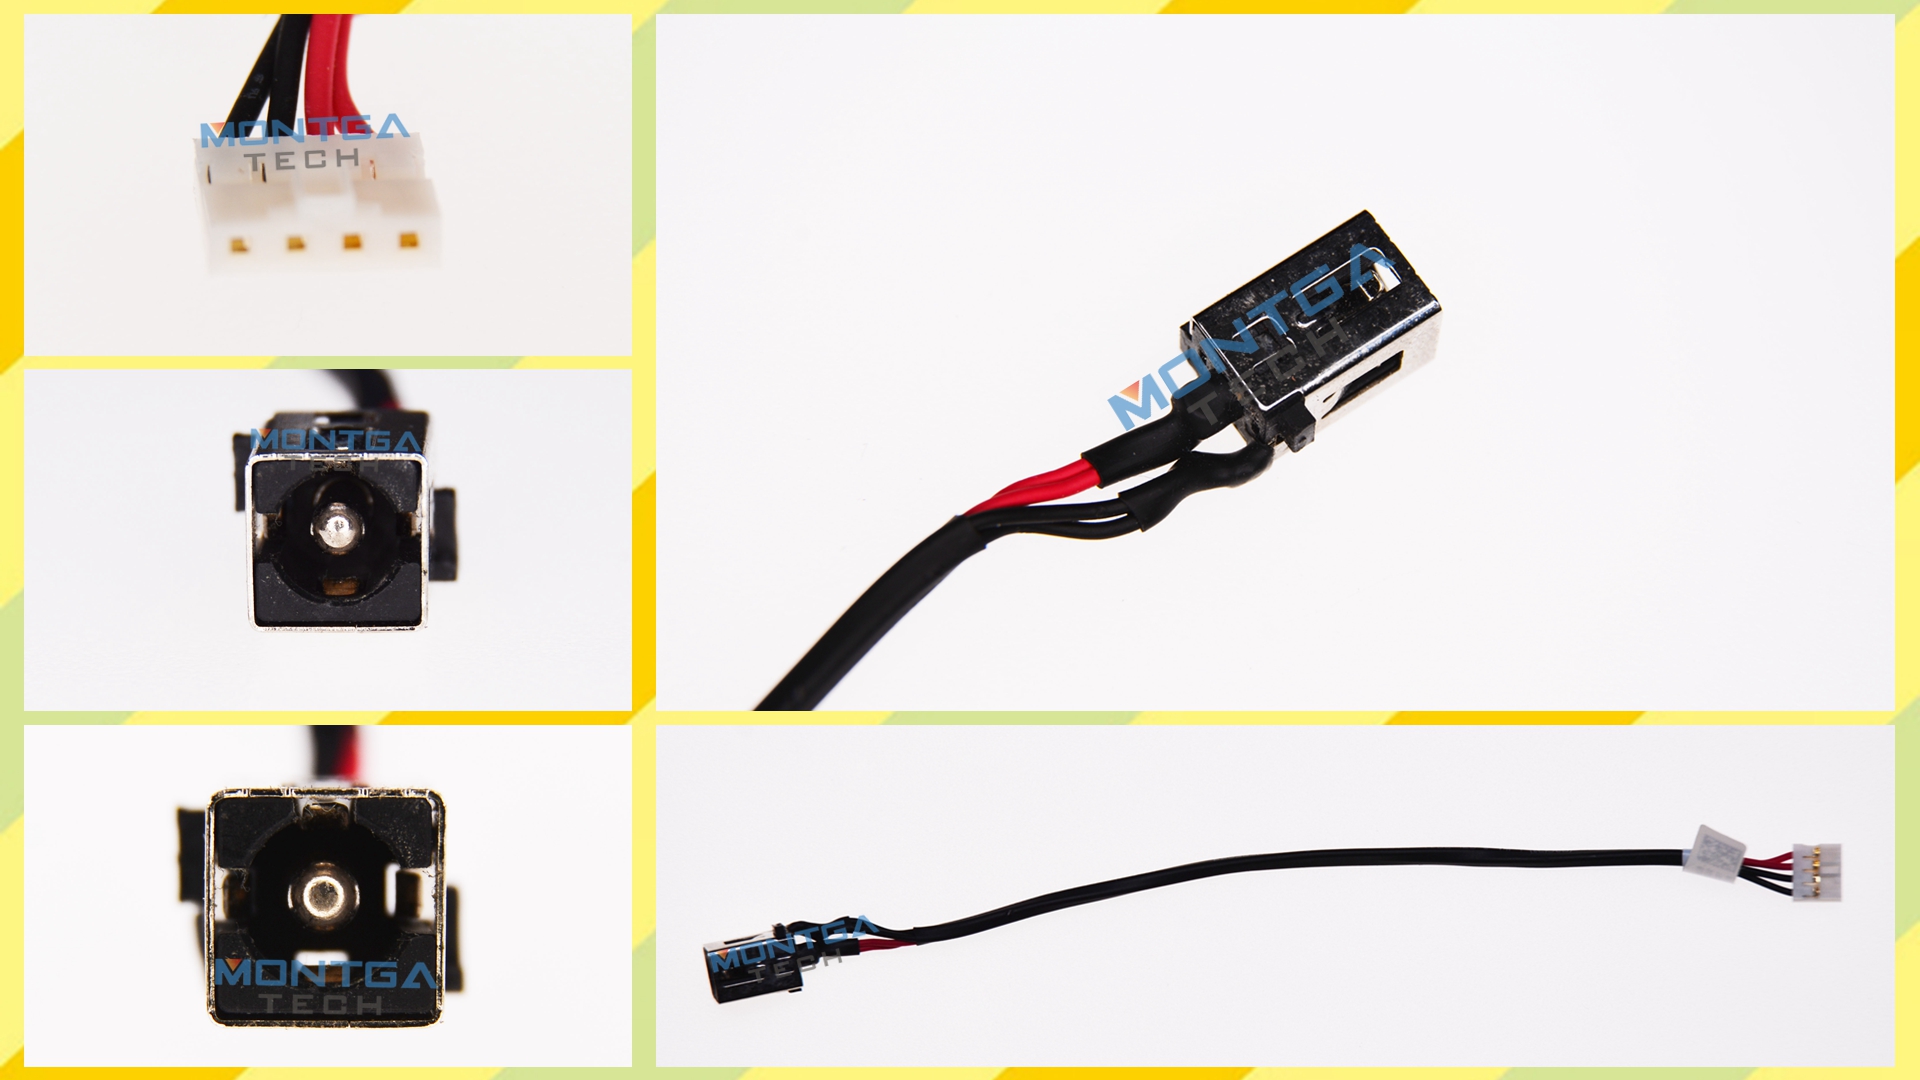 Cable Length: Buy 2 Piece Cables New Laptop for Toshiba P75 P75 L50 CB35 C40A L50-B L50D-B L50T-B DC Jack Power Socket Charging Connector Port 